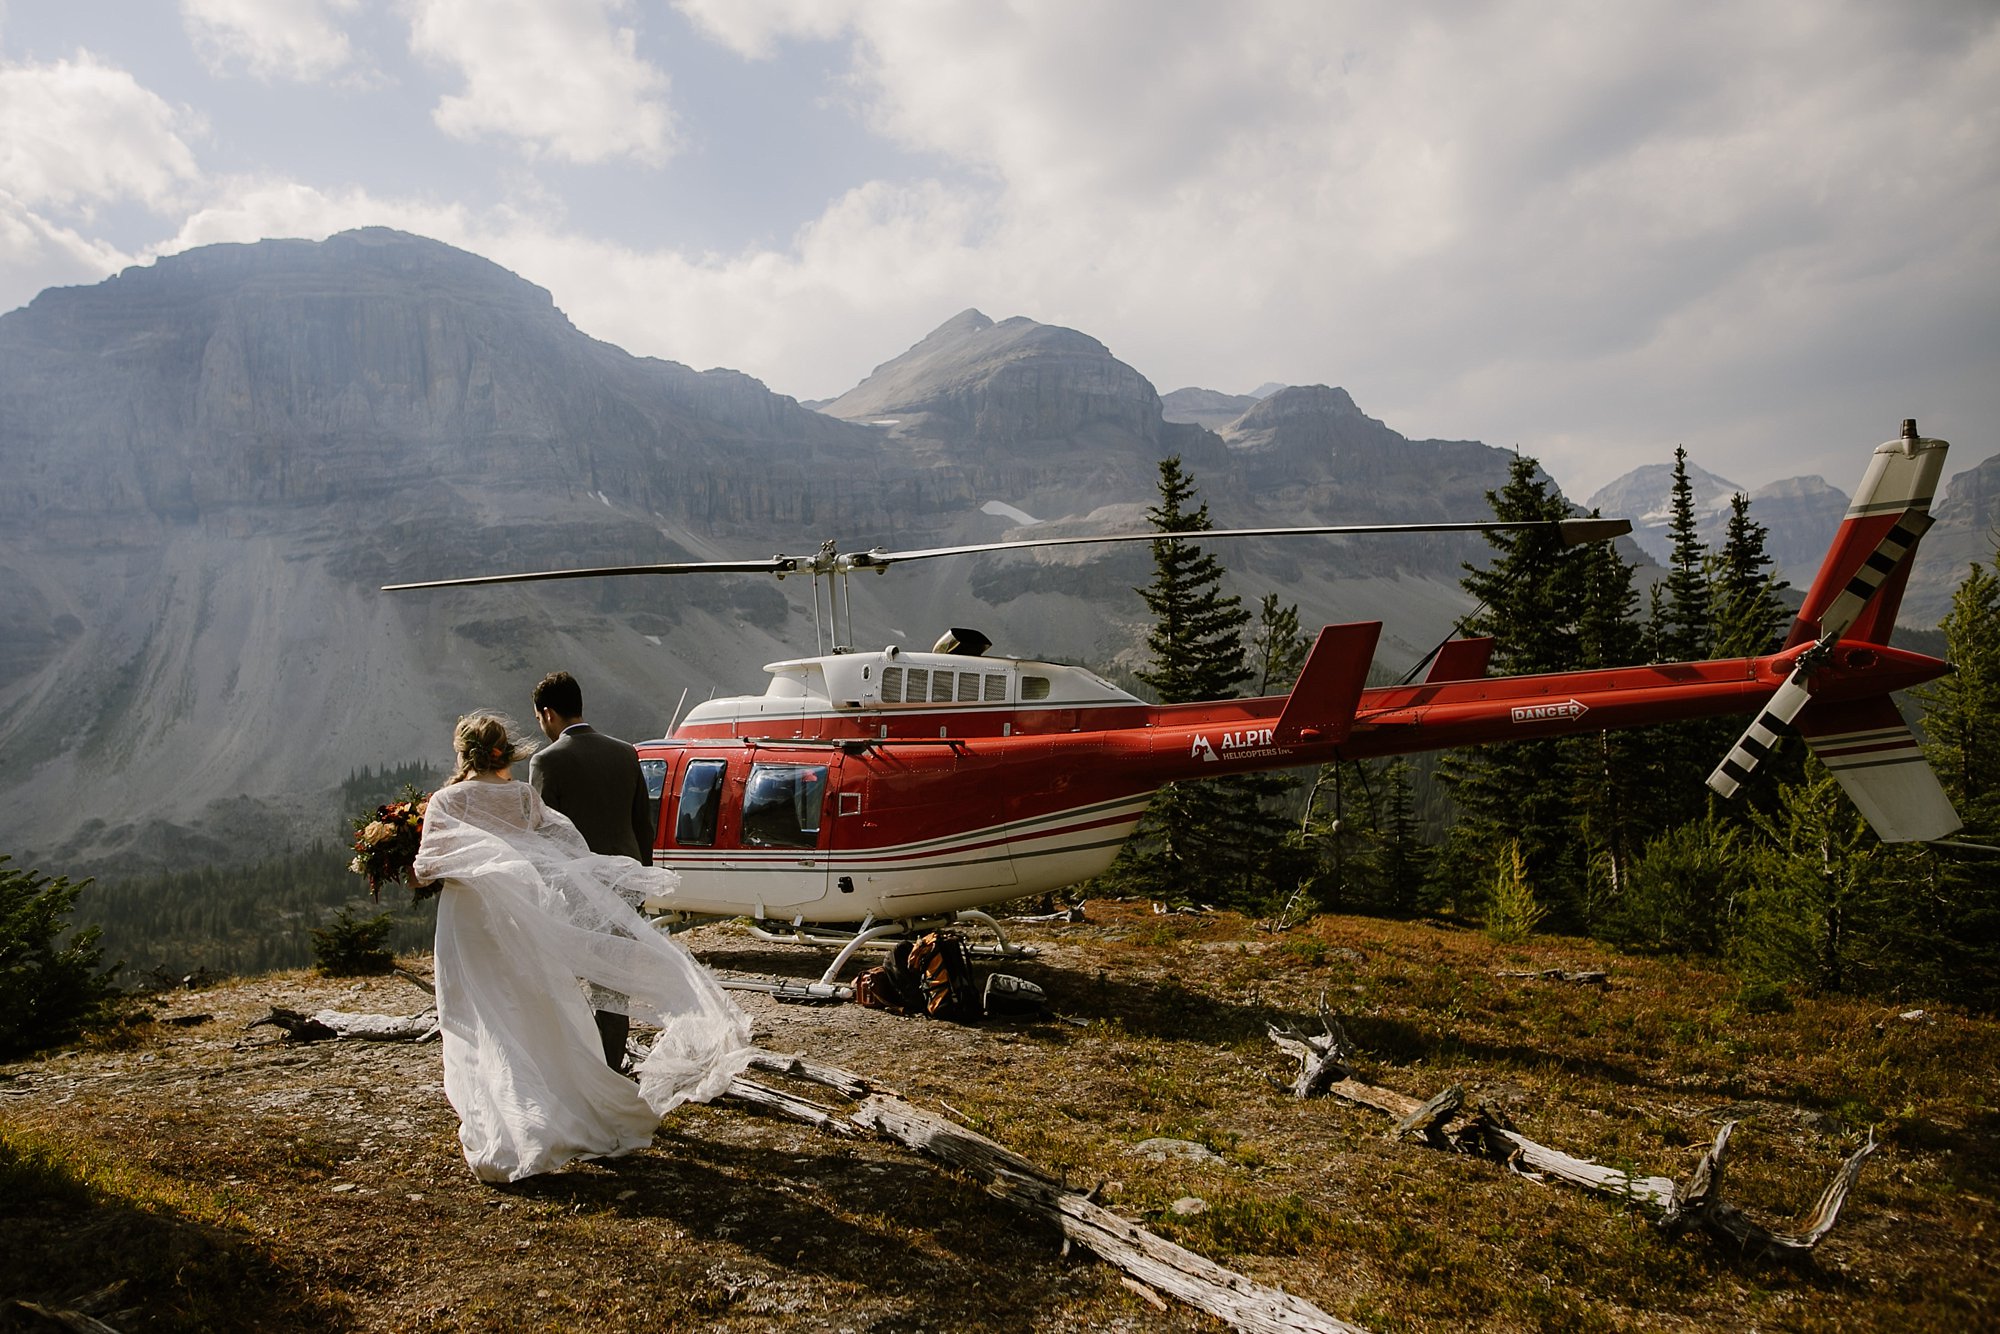 Helicopter elopement wedding in Banff National Park